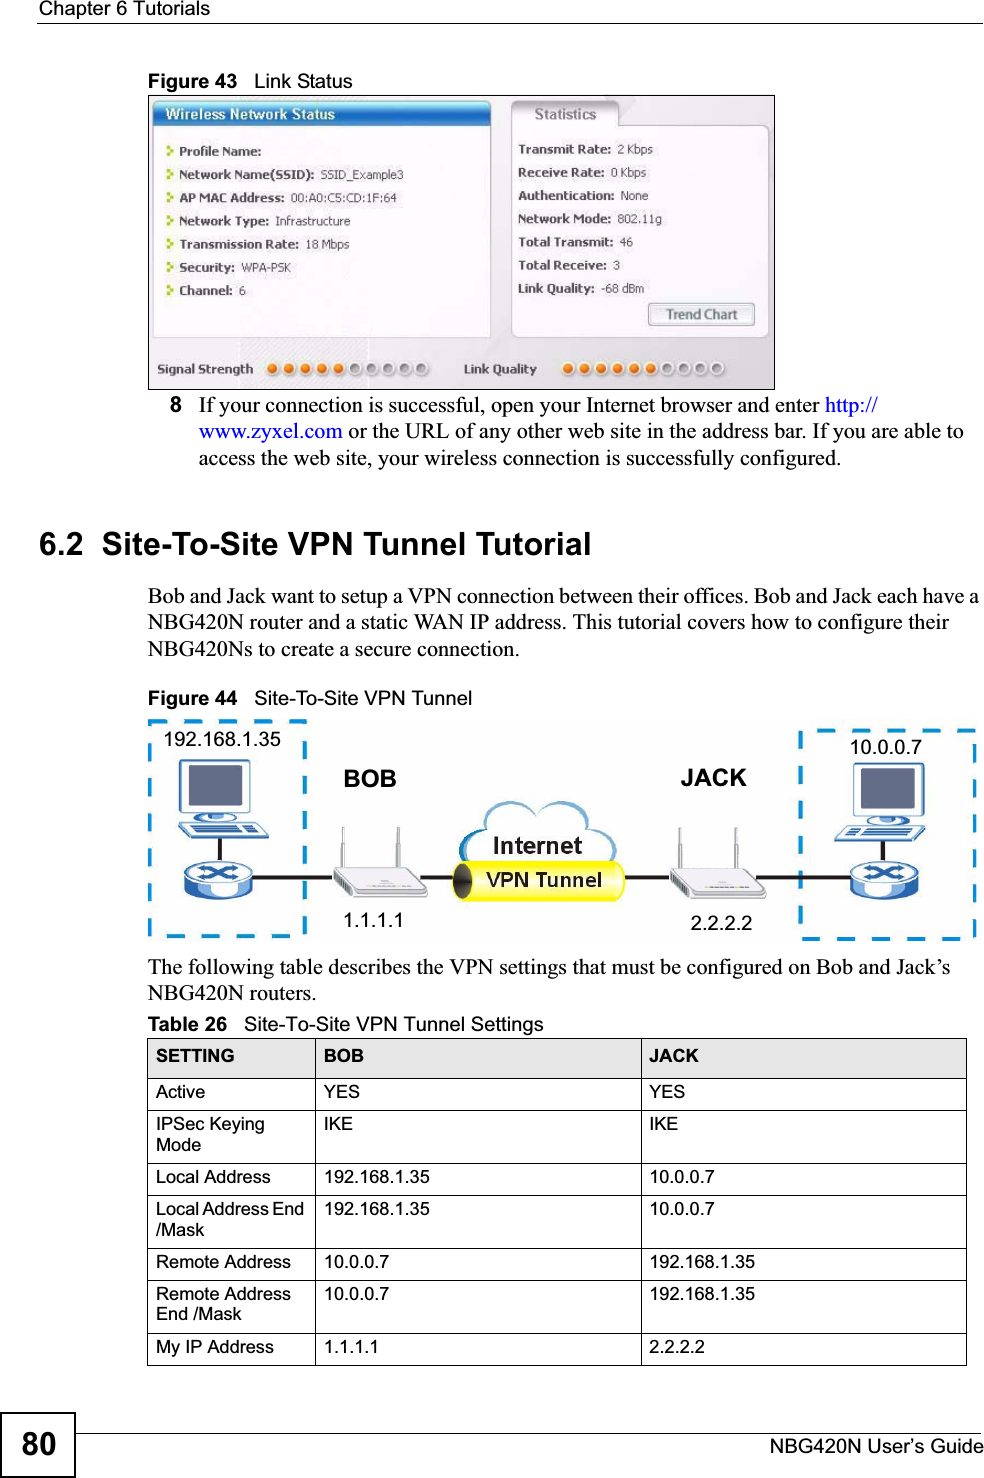 Chapter 6 TutorialsNBG420N User’s Guide80Figure 43   Link Status 8If your connection is successful, open your Internet browser and enter http://www.zyxel.com or the URL of any other web site in the address bar. If you are able to access the web site, your wireless connection is successfully configured.6.2  Site-To-Site VPN Tunnel TutorialBob and Jack want to setup a VPN connection between their offices. Bob and Jack each have a NBG420N router and a static WAN IP address. This tutorial covers how to configure their NBG420Ns to create a secure connection.Figure 44   Site-To-Site VPN TunnelThe following table describes the VPN settings that must be configured on Bob and Jack’s NBG420N routers.Table 26   Site-To-Site VPN Tunnel Settings SETTING BOB JACKActive YES YESIPSec Keying ModeIKE IKELocal Address 192.168.1.35 10.0.0.7Local Address End /Mask192.168.1.35 10.0.0.7Remote Address 10.0.0.7 192.168.1.35Remote Address End /Mask10.0.0.7 192.168.1.35My IP Address  1.1.1.1 2.2.2.2192.168.1.35 10.0.0.7BOB JACK1.1.1.1 2.2.2.2